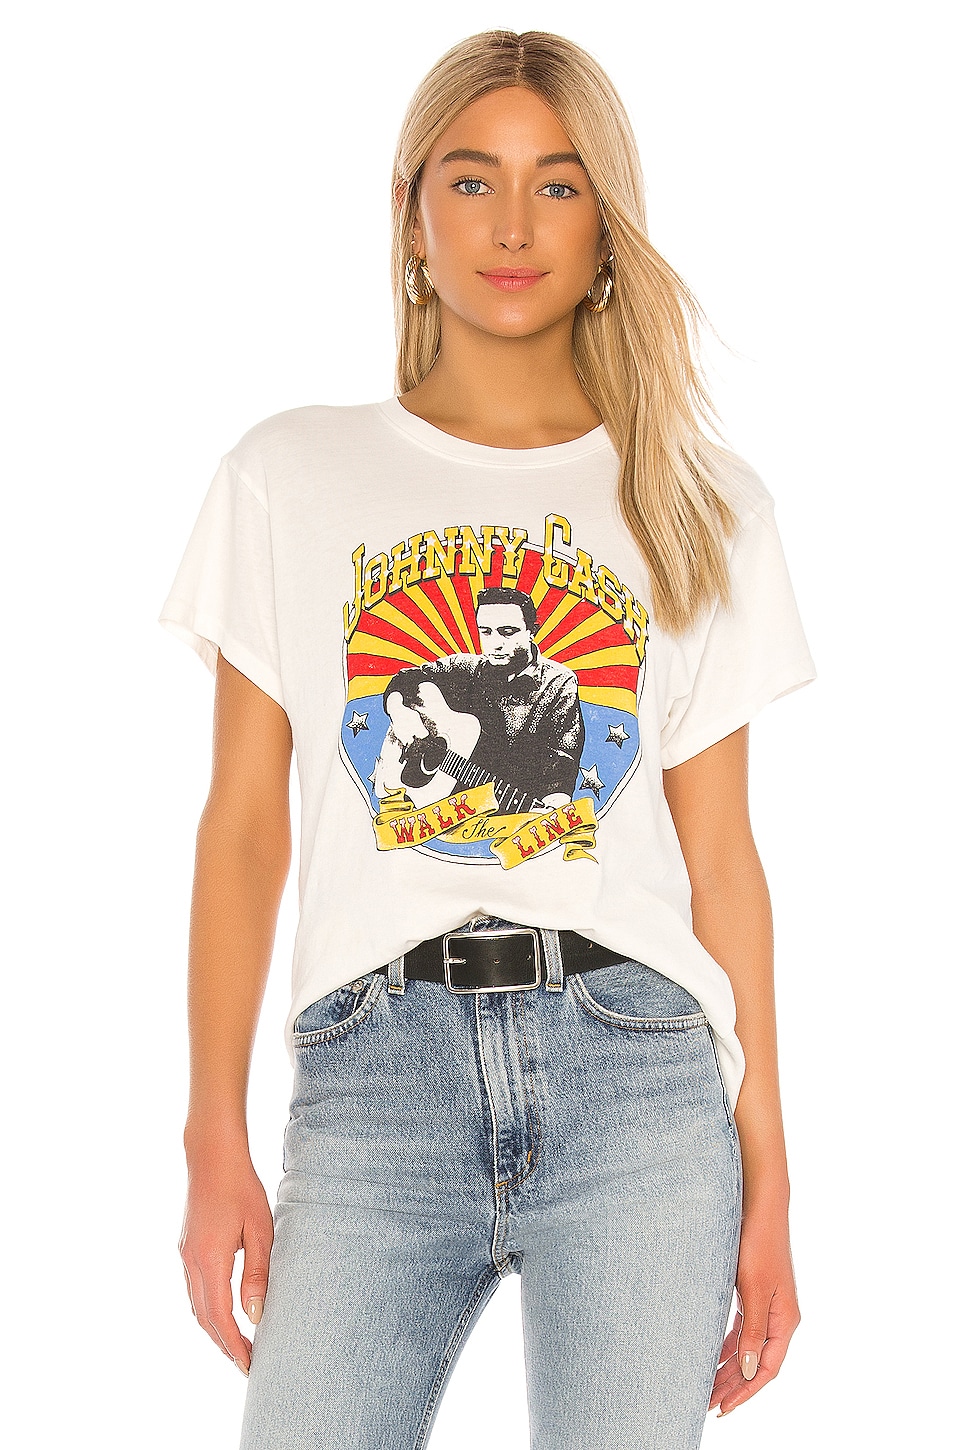 DAYDREAMER Johnny Cash The Icon Tour Tee in Vintage White | REVOLVE